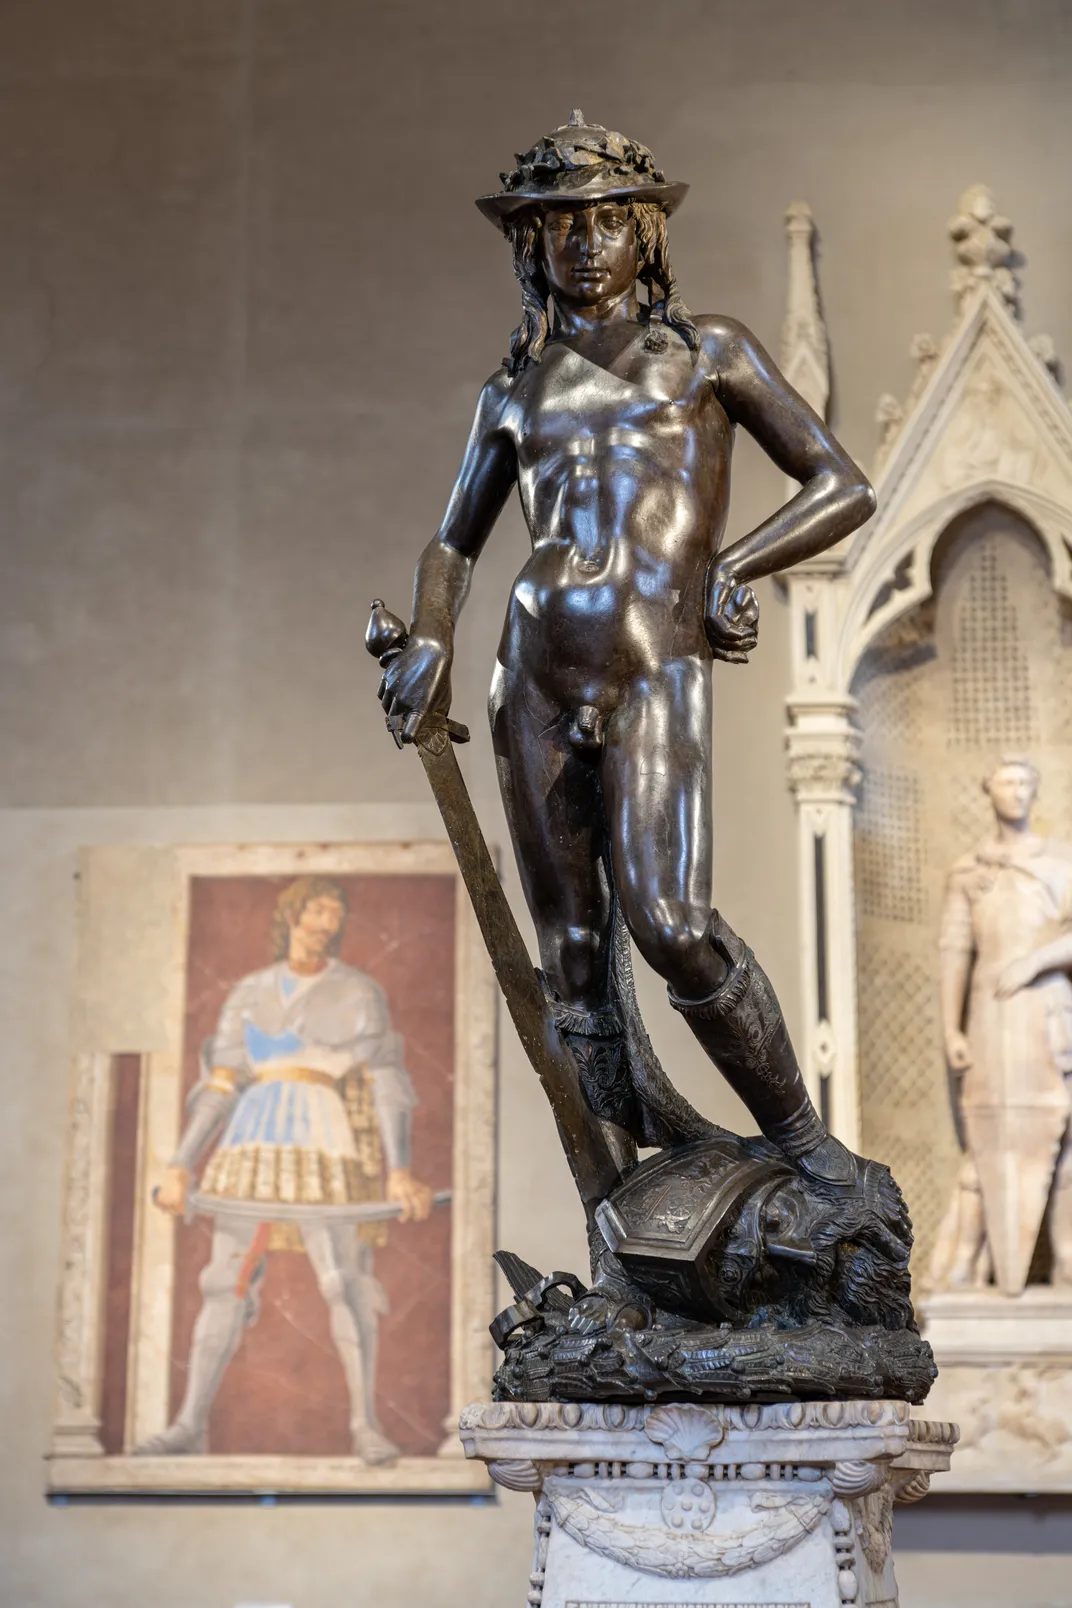 A bronze statue of a young man standing triumphantly on the head of Goliath